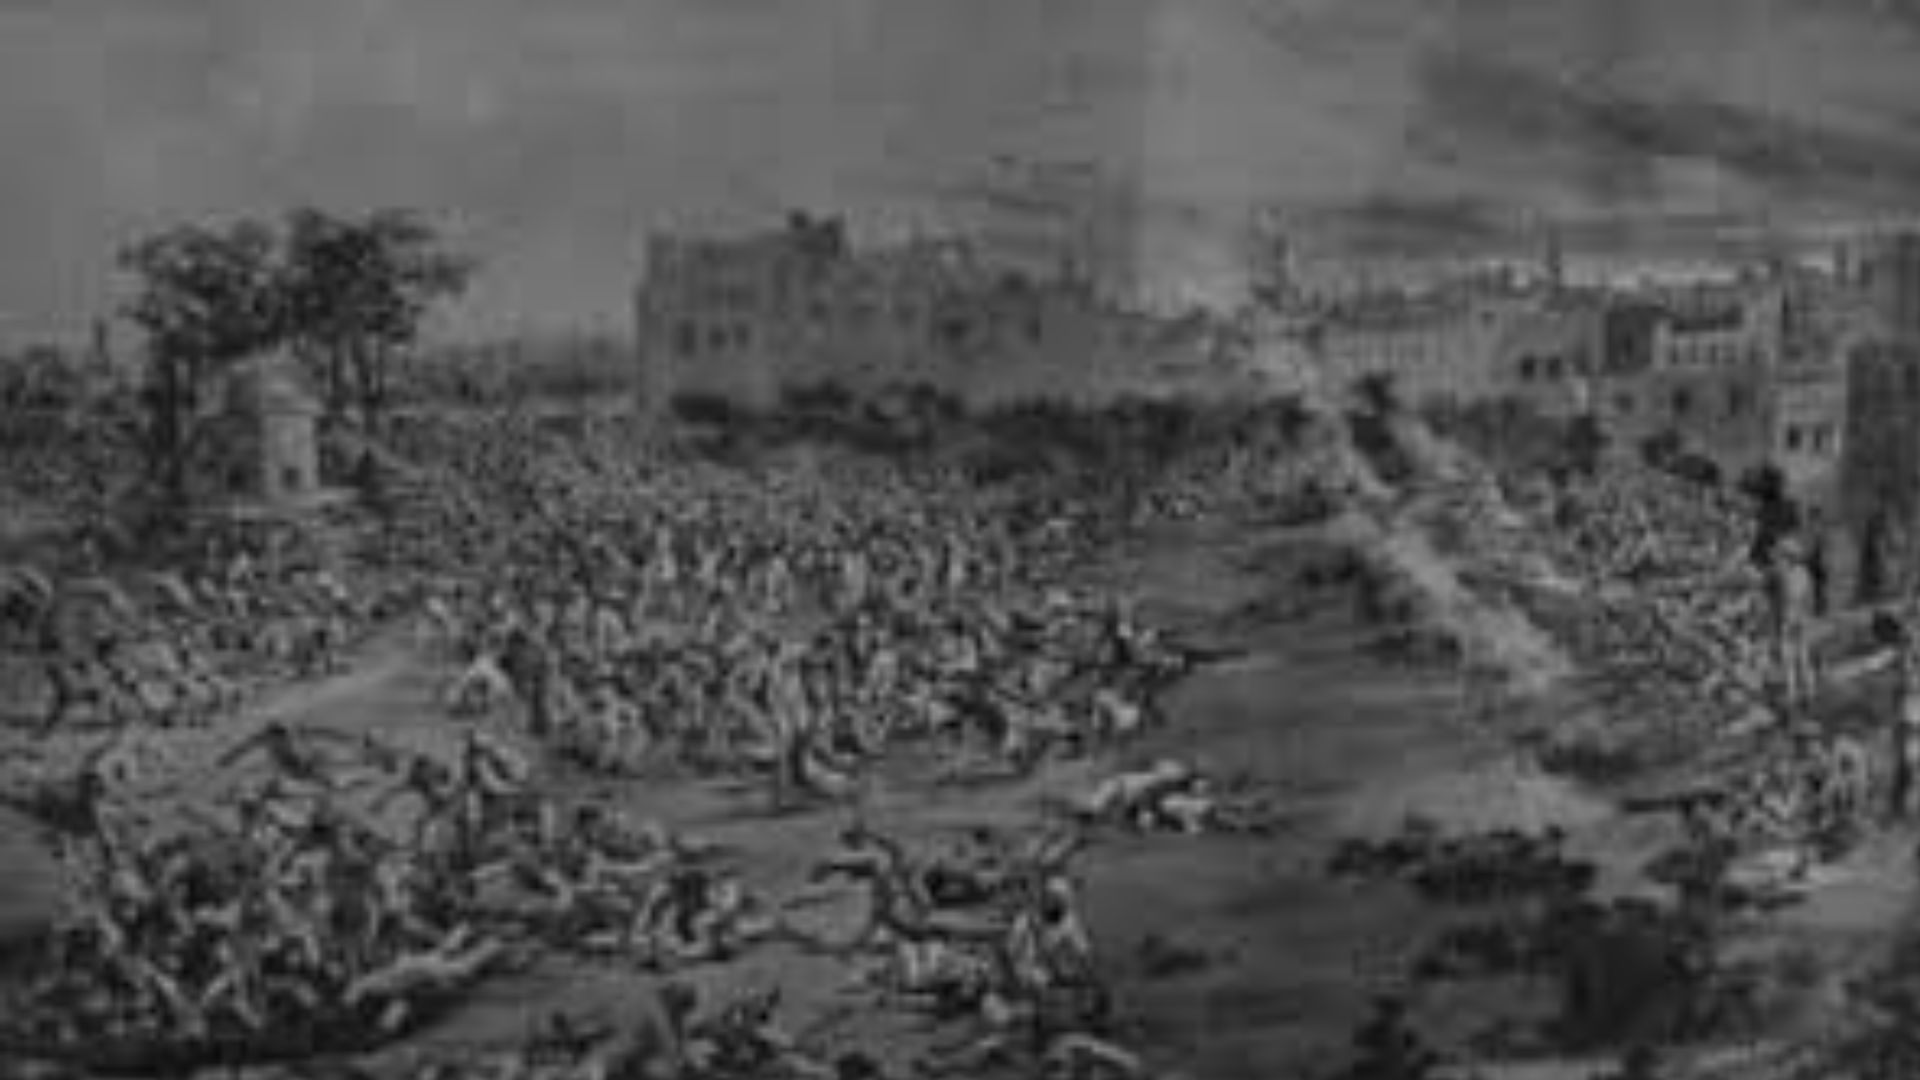 April 13, From historical recollections; Jallianwala Bagh massacre, unforgettable even after 105 years